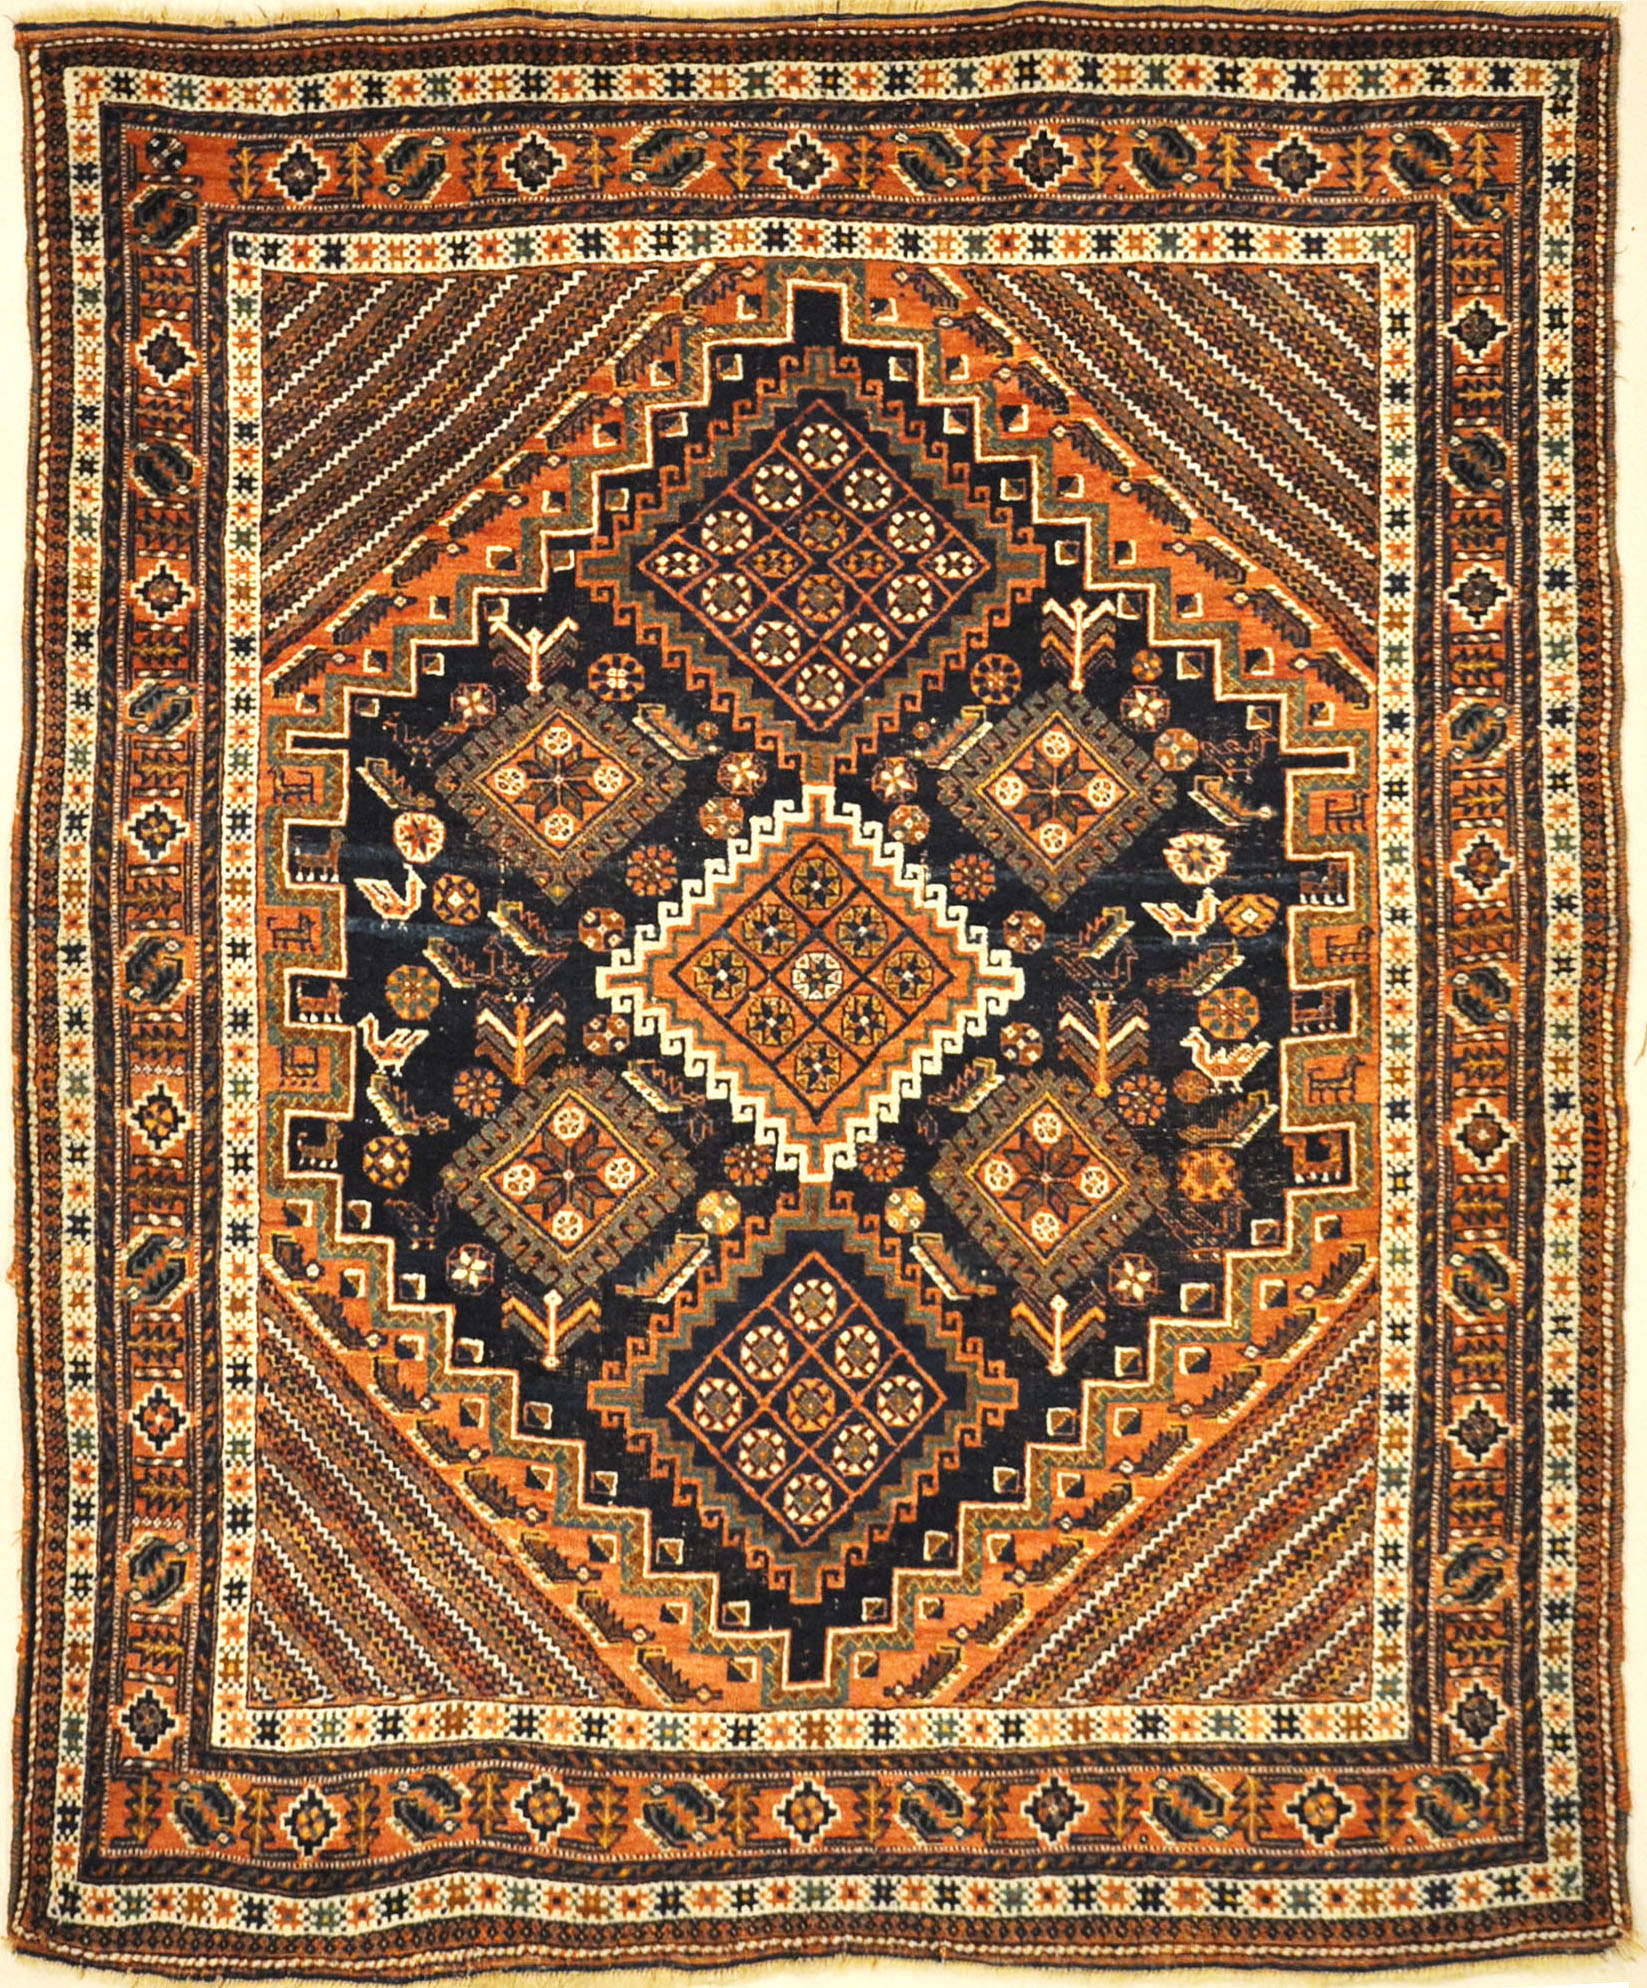 Antique Persian Afshar Rug Circa 1880. A piece of genuine authentic woven carpet art sold by Santa Barbara Design Center Rugs and More.